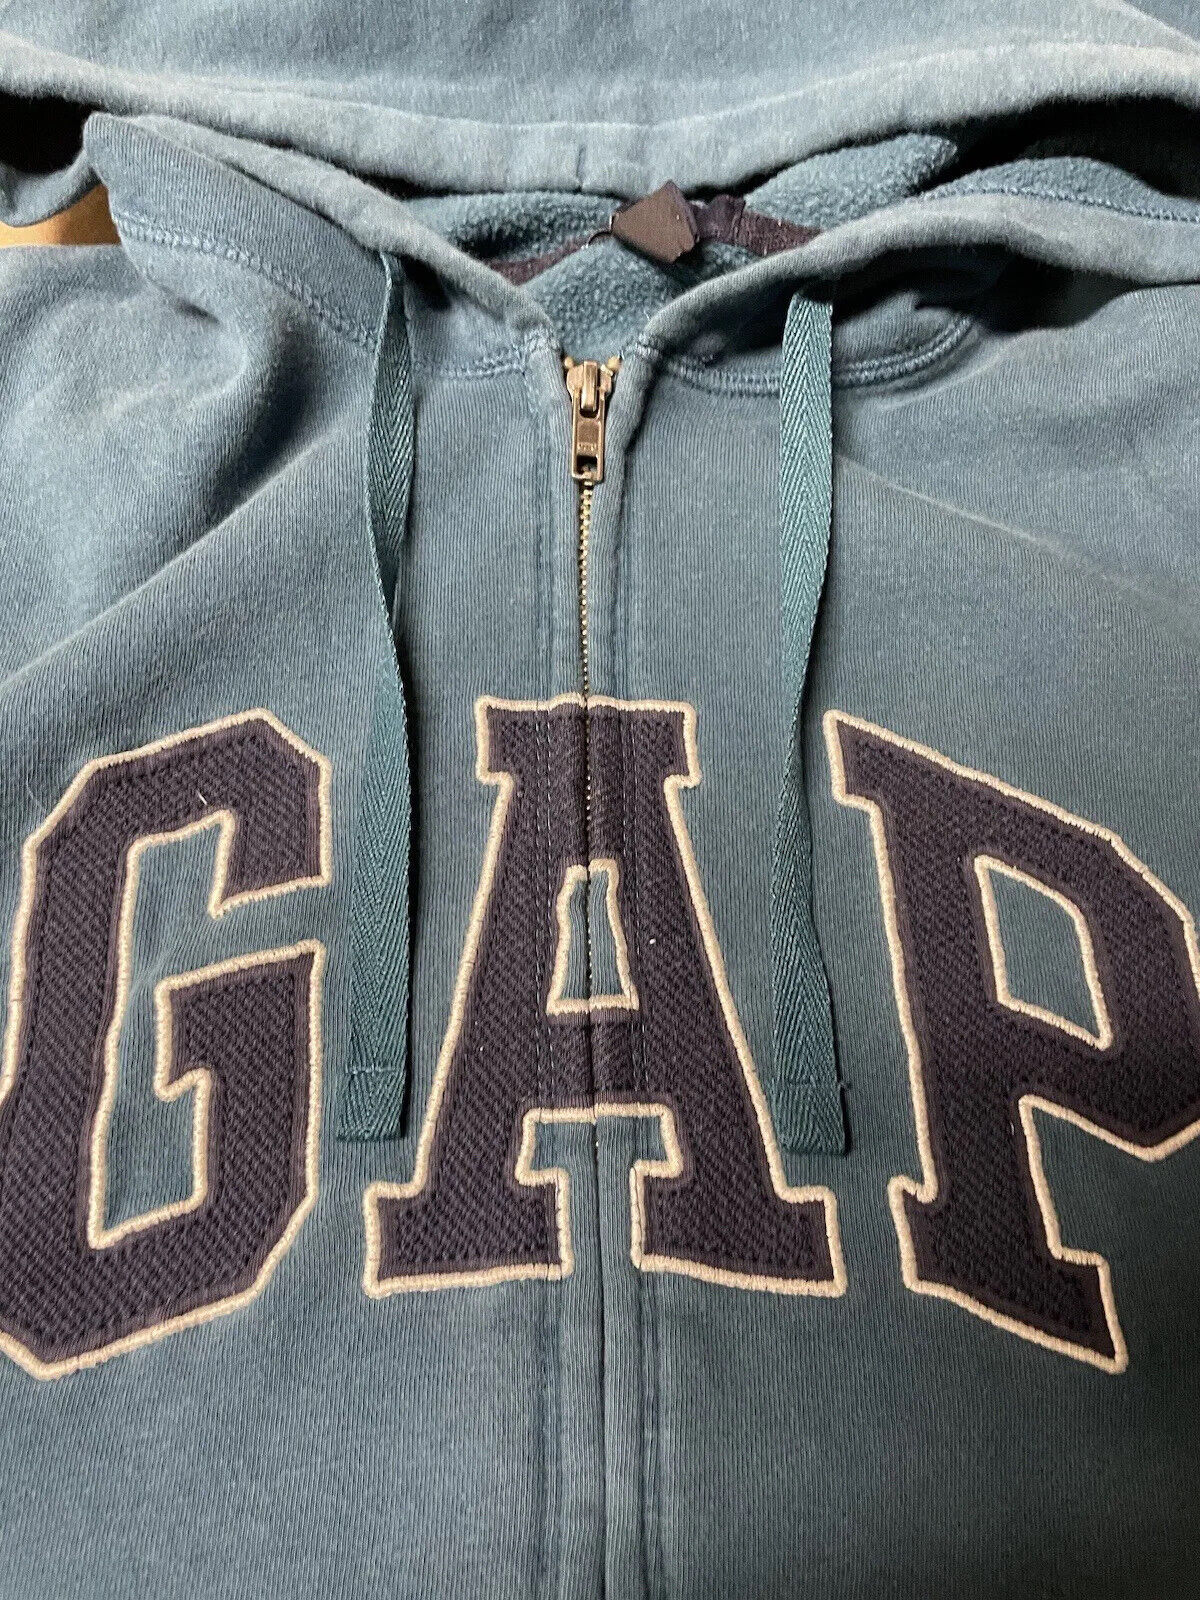 GAP blue zip up hoodie Embroidered Spell out Adul… - image 6